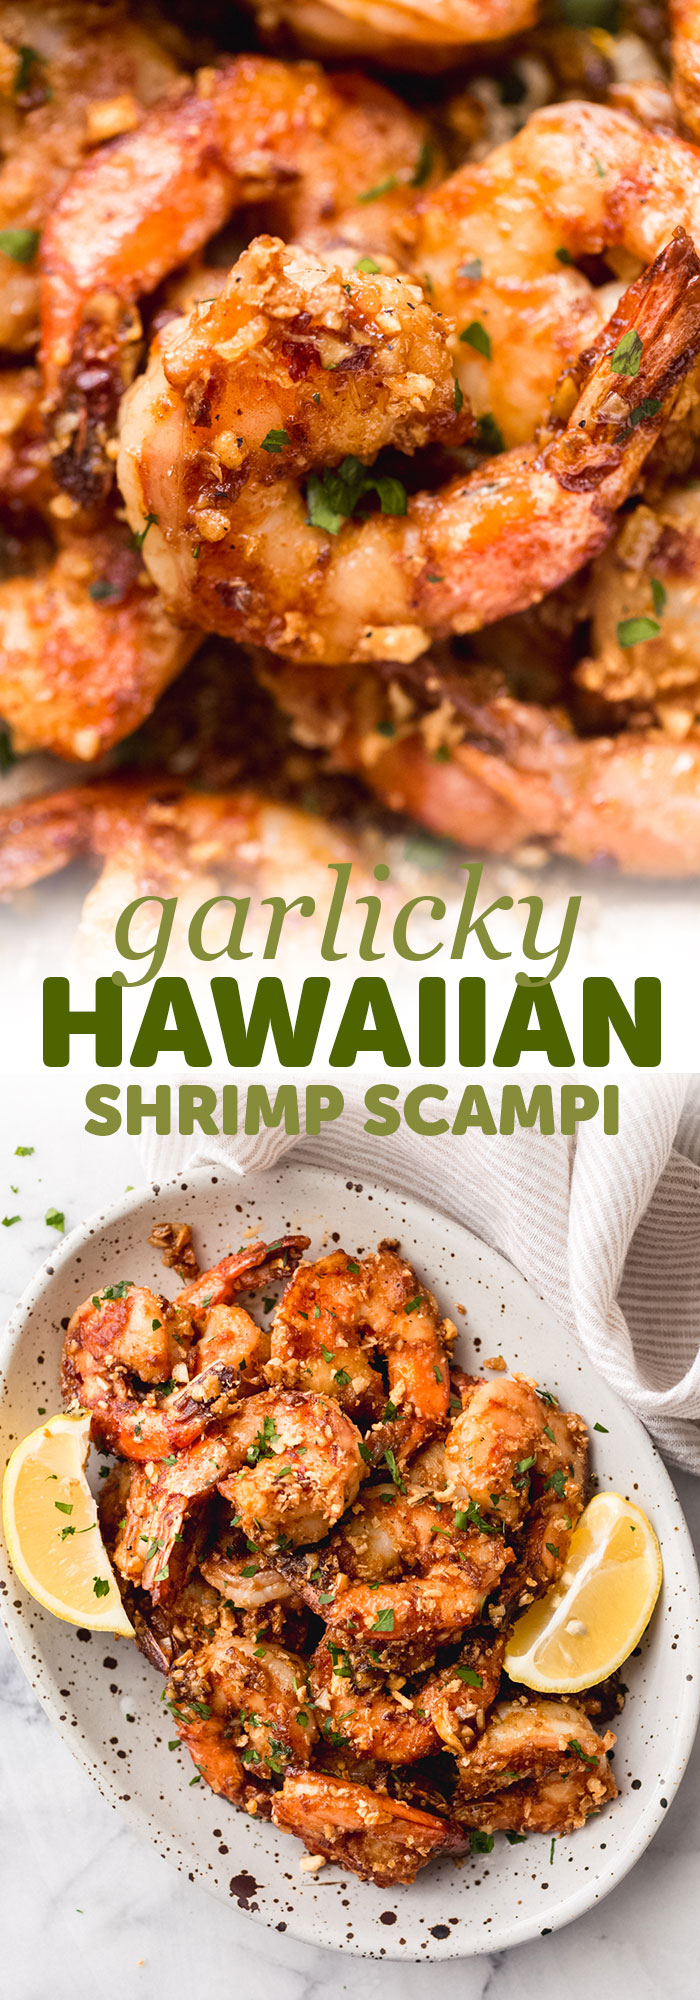 Garlicky Hawaiian Shrimp Scampi - a Hawaiian take on the garlic shrimp scampi! Loaded with so much umami flavor, these are sure to be a hit! #garlicshrimpscampi #shrimpscampi #garlicbuttershrimp #hawaiianshrimpscampi #hawaiianscampi #shrimp | Llittlespicejar.com